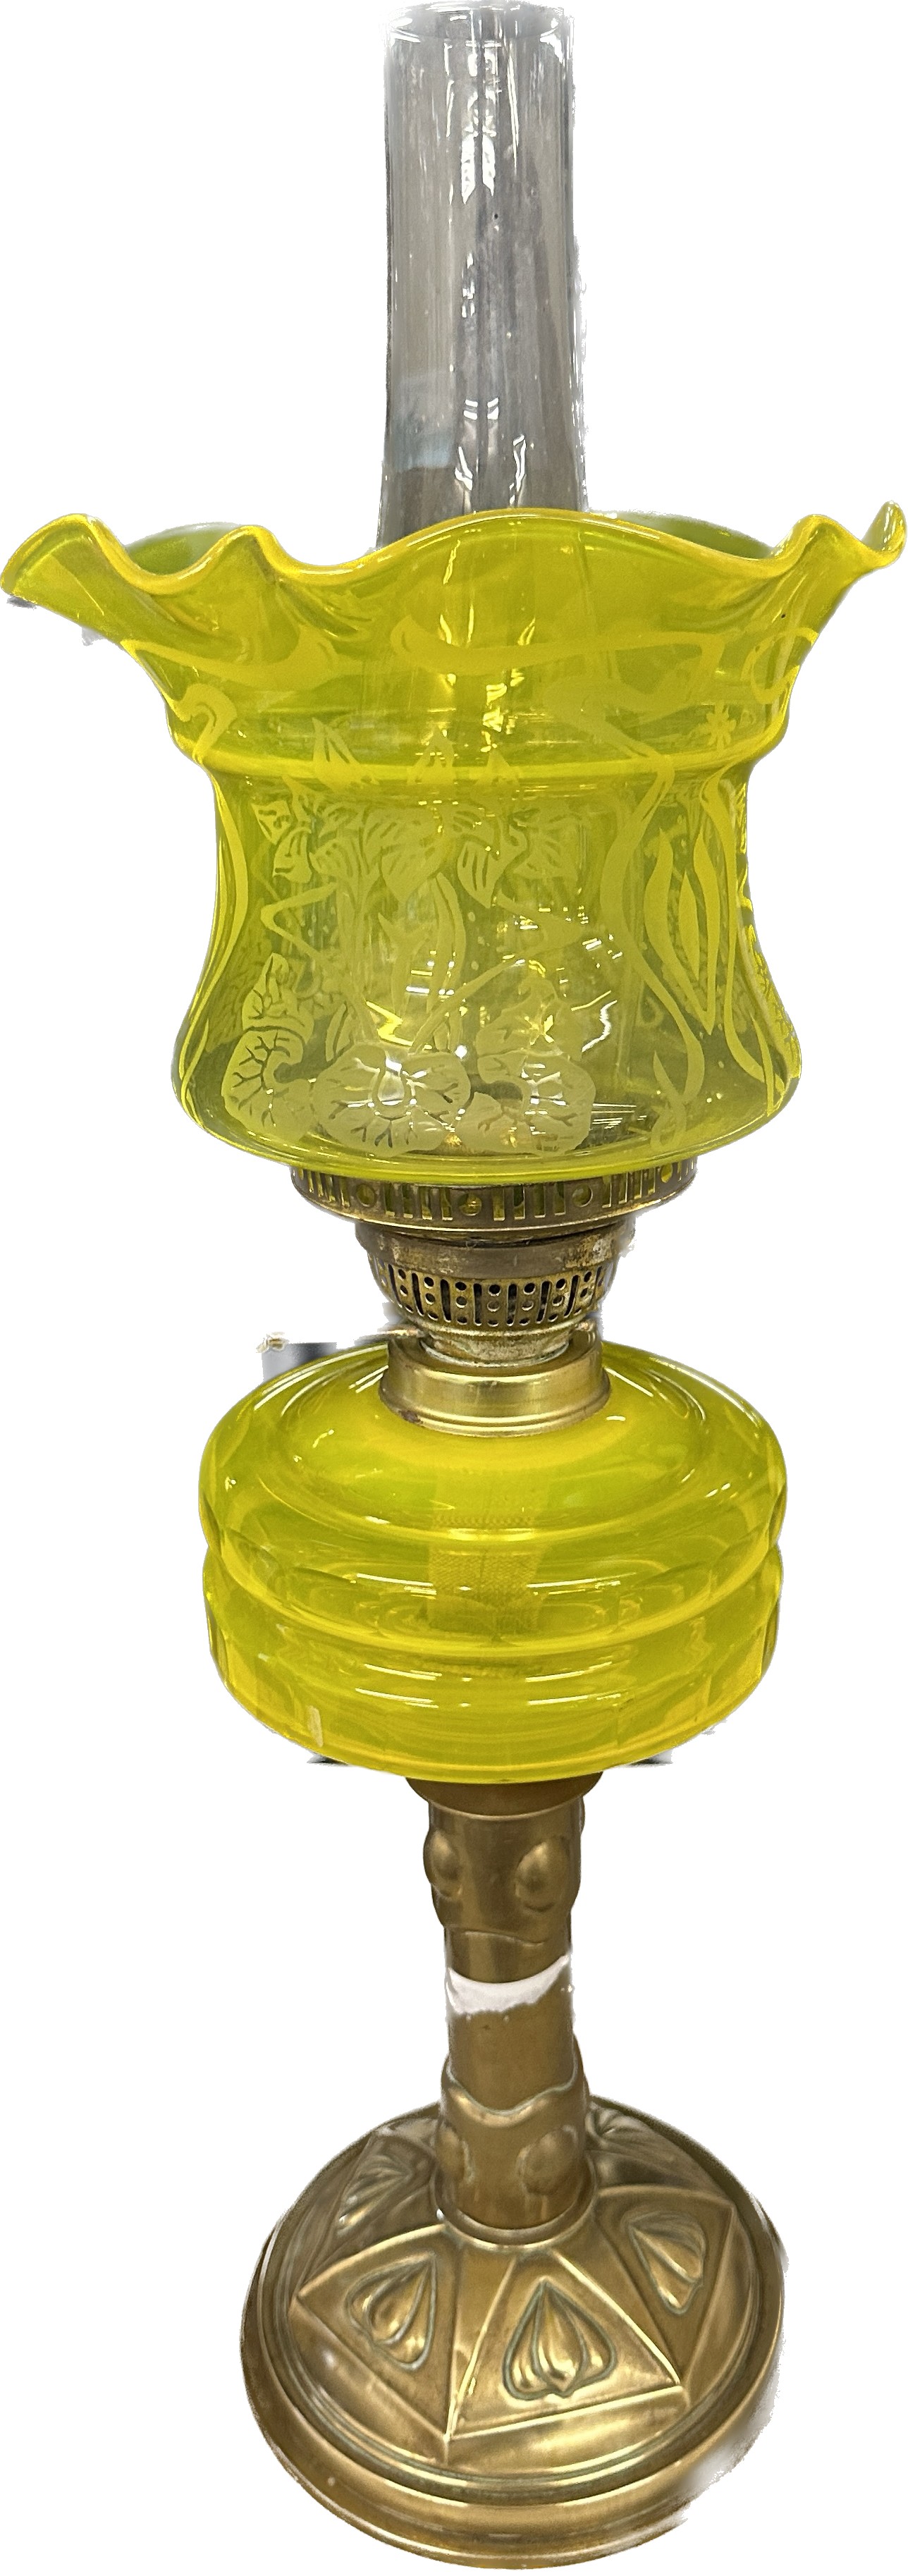 Antique brass bass yellow glass oil lamp complete with funnel and shade - Image 4 of 4